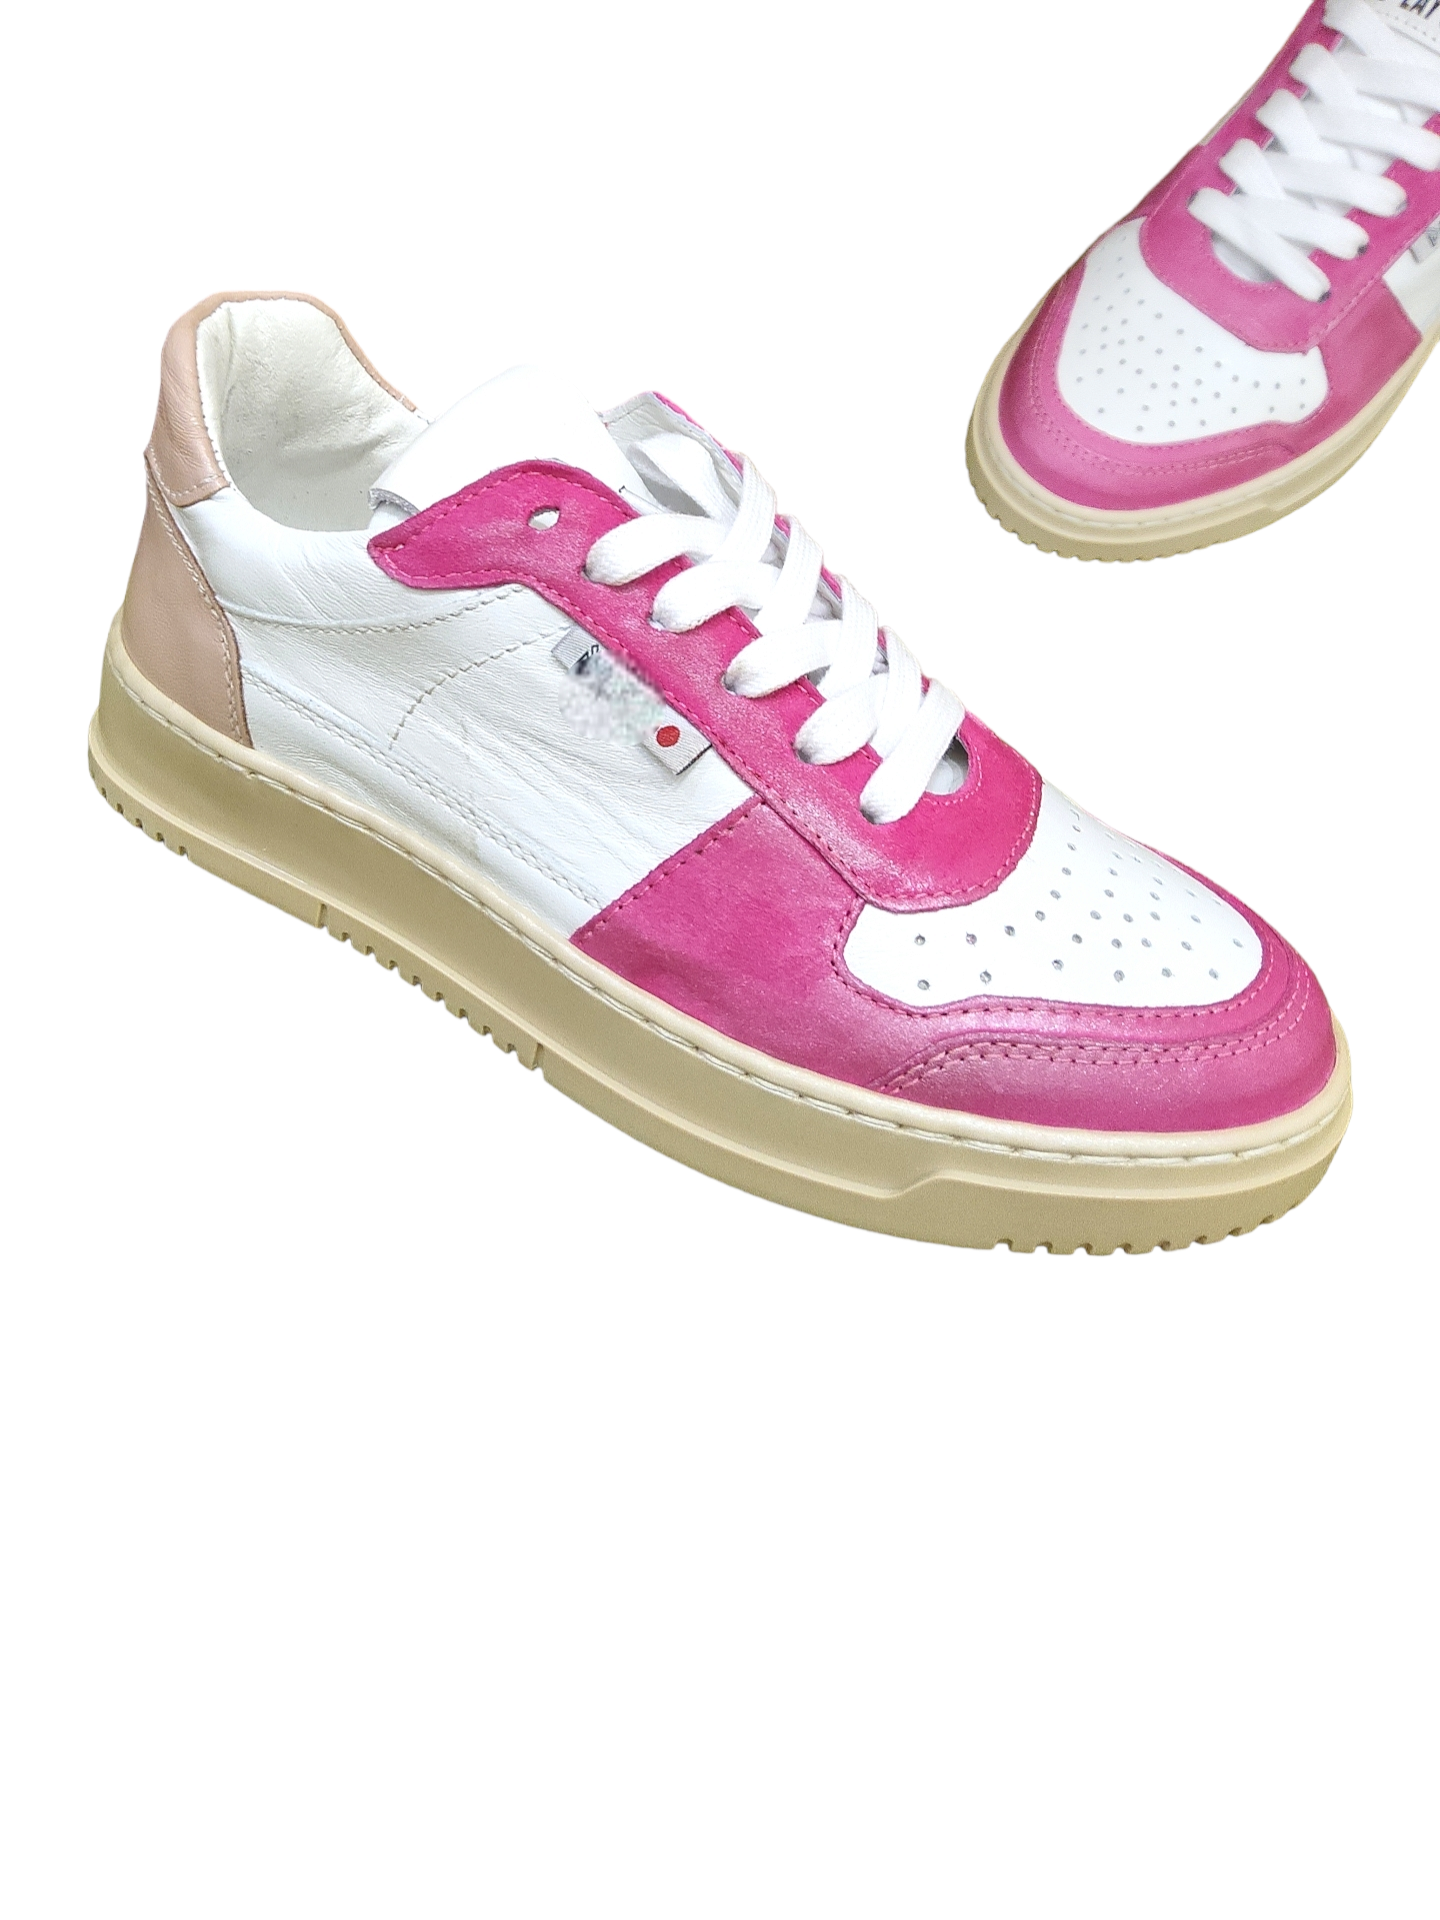 White and pink trainer